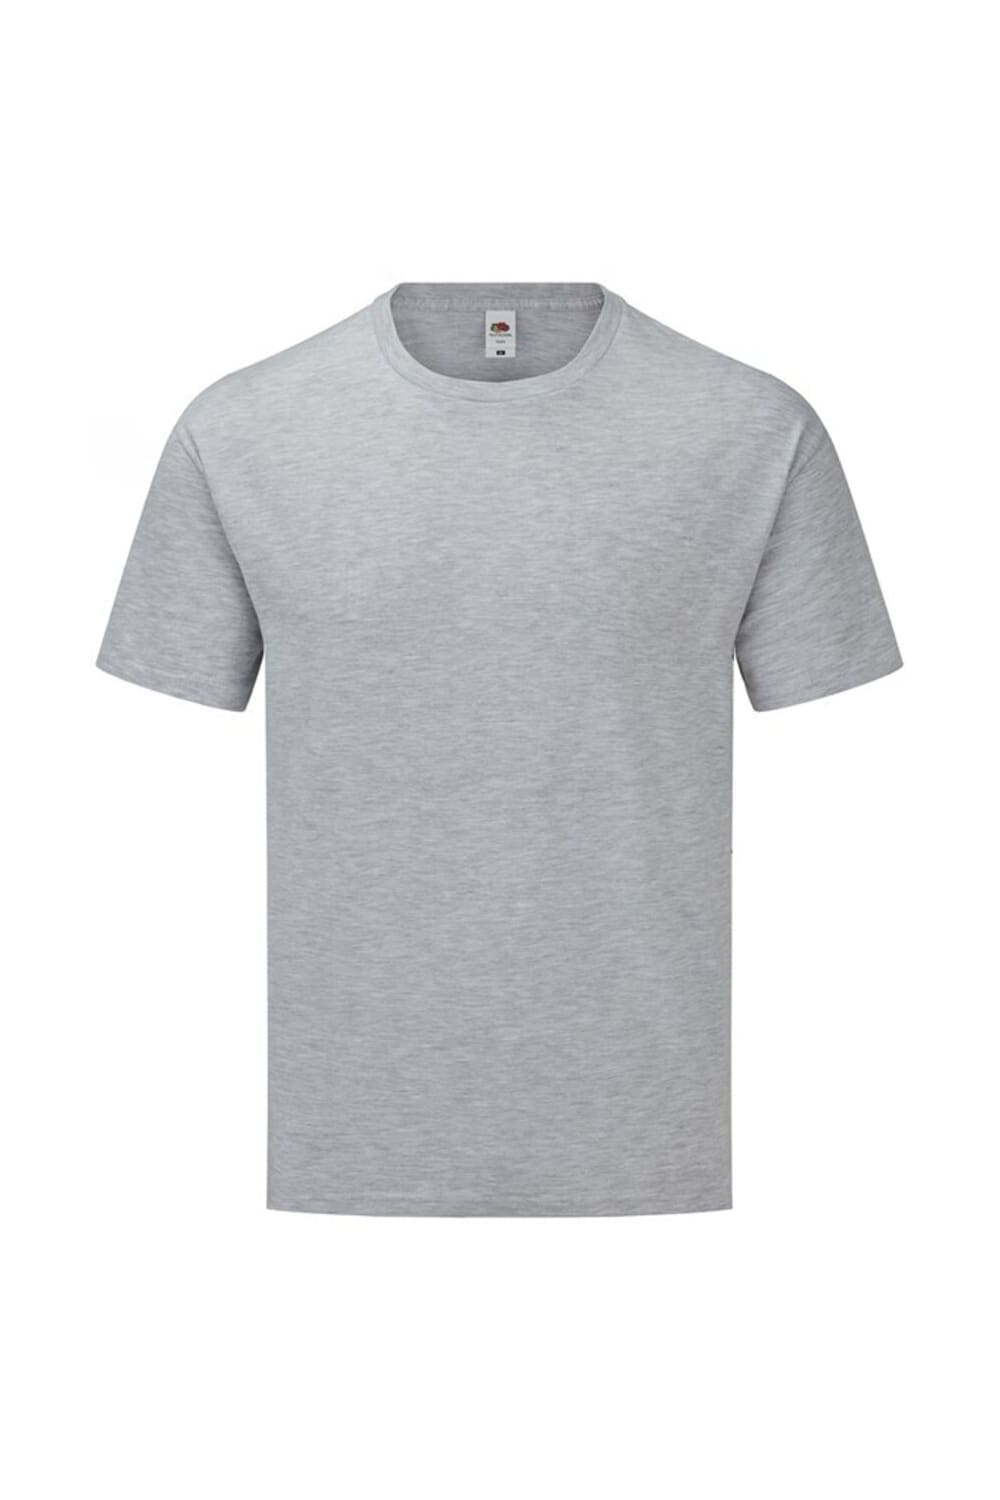 Fruit of the Loom Unisex Adult Iconic 165 Classic T-Shirt (Gray Heather)